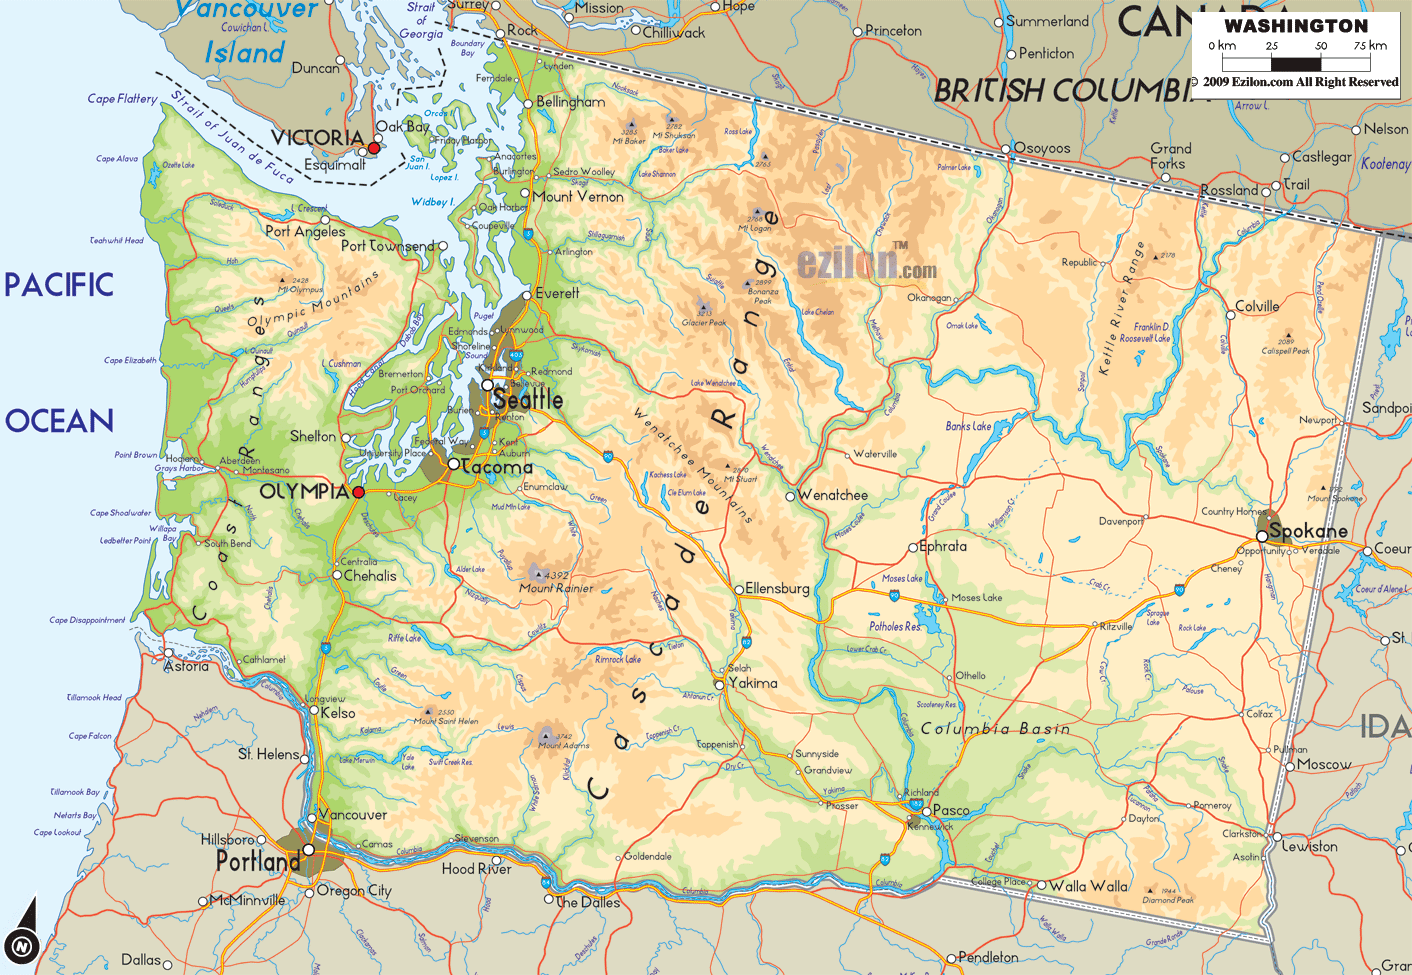 The Physical map of Washington State, USA showing major geographical features such as rivers, lakes, topography and land formations.